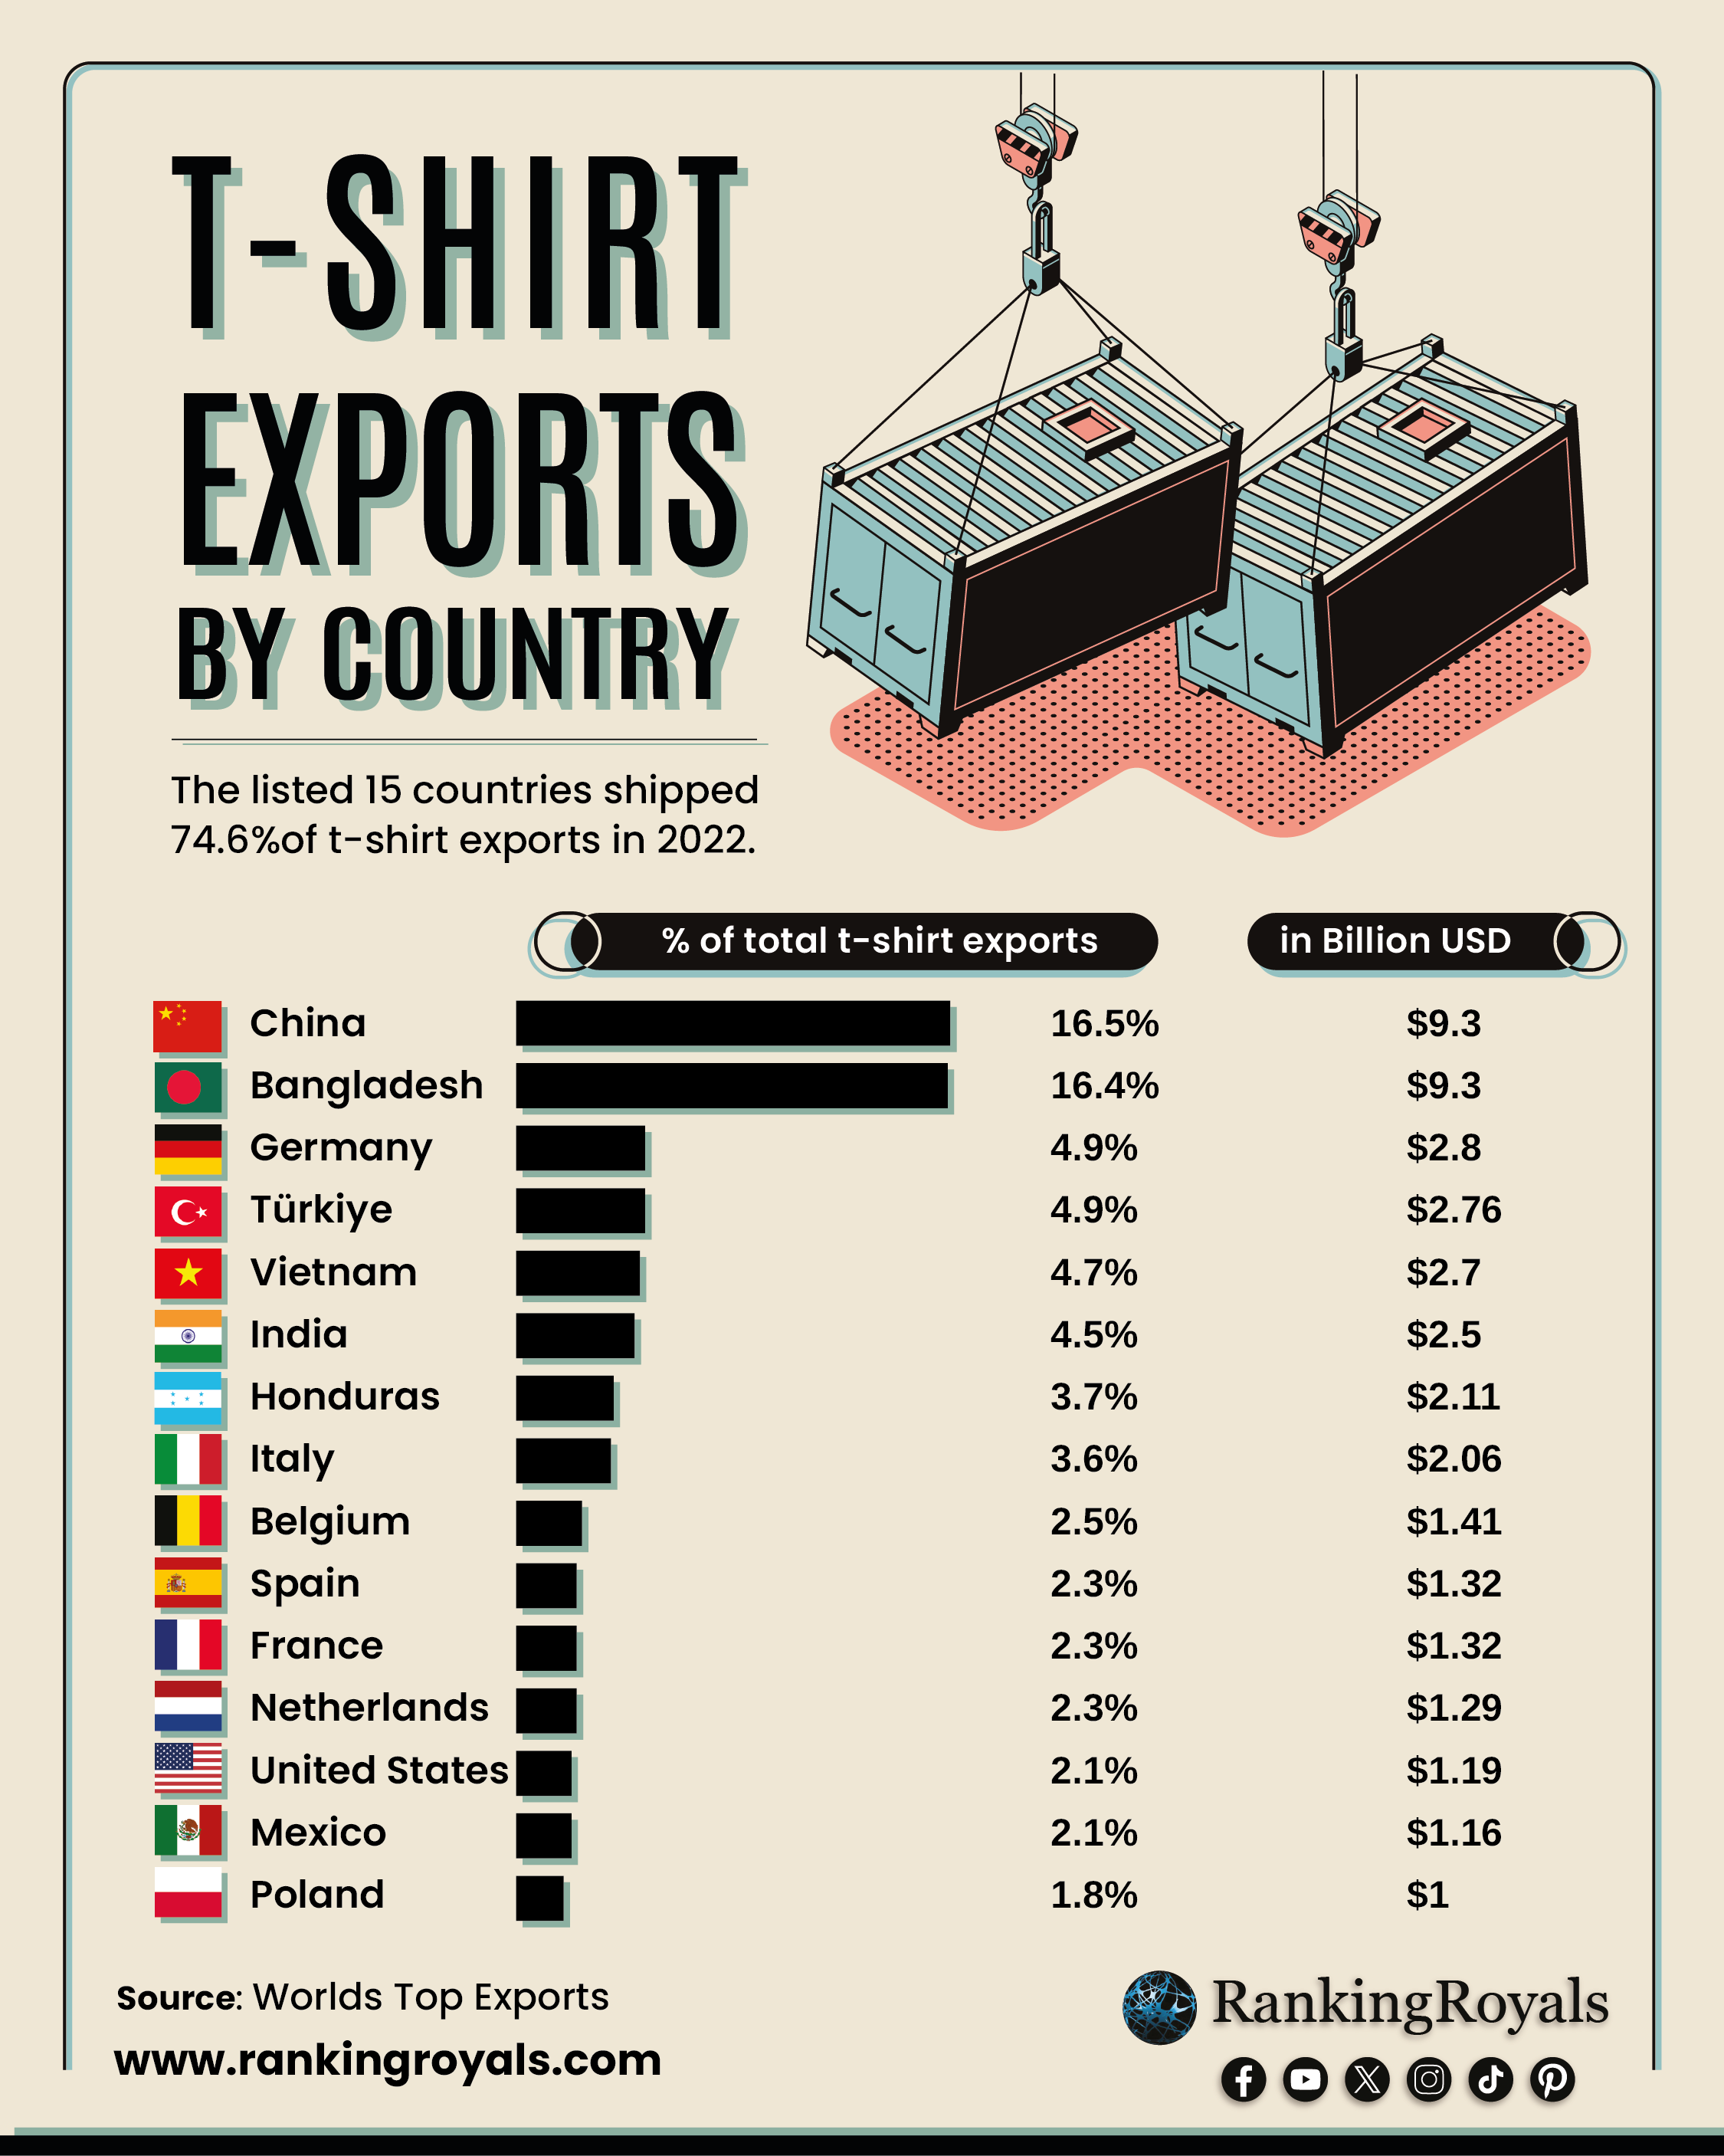 t-shirt exports by country